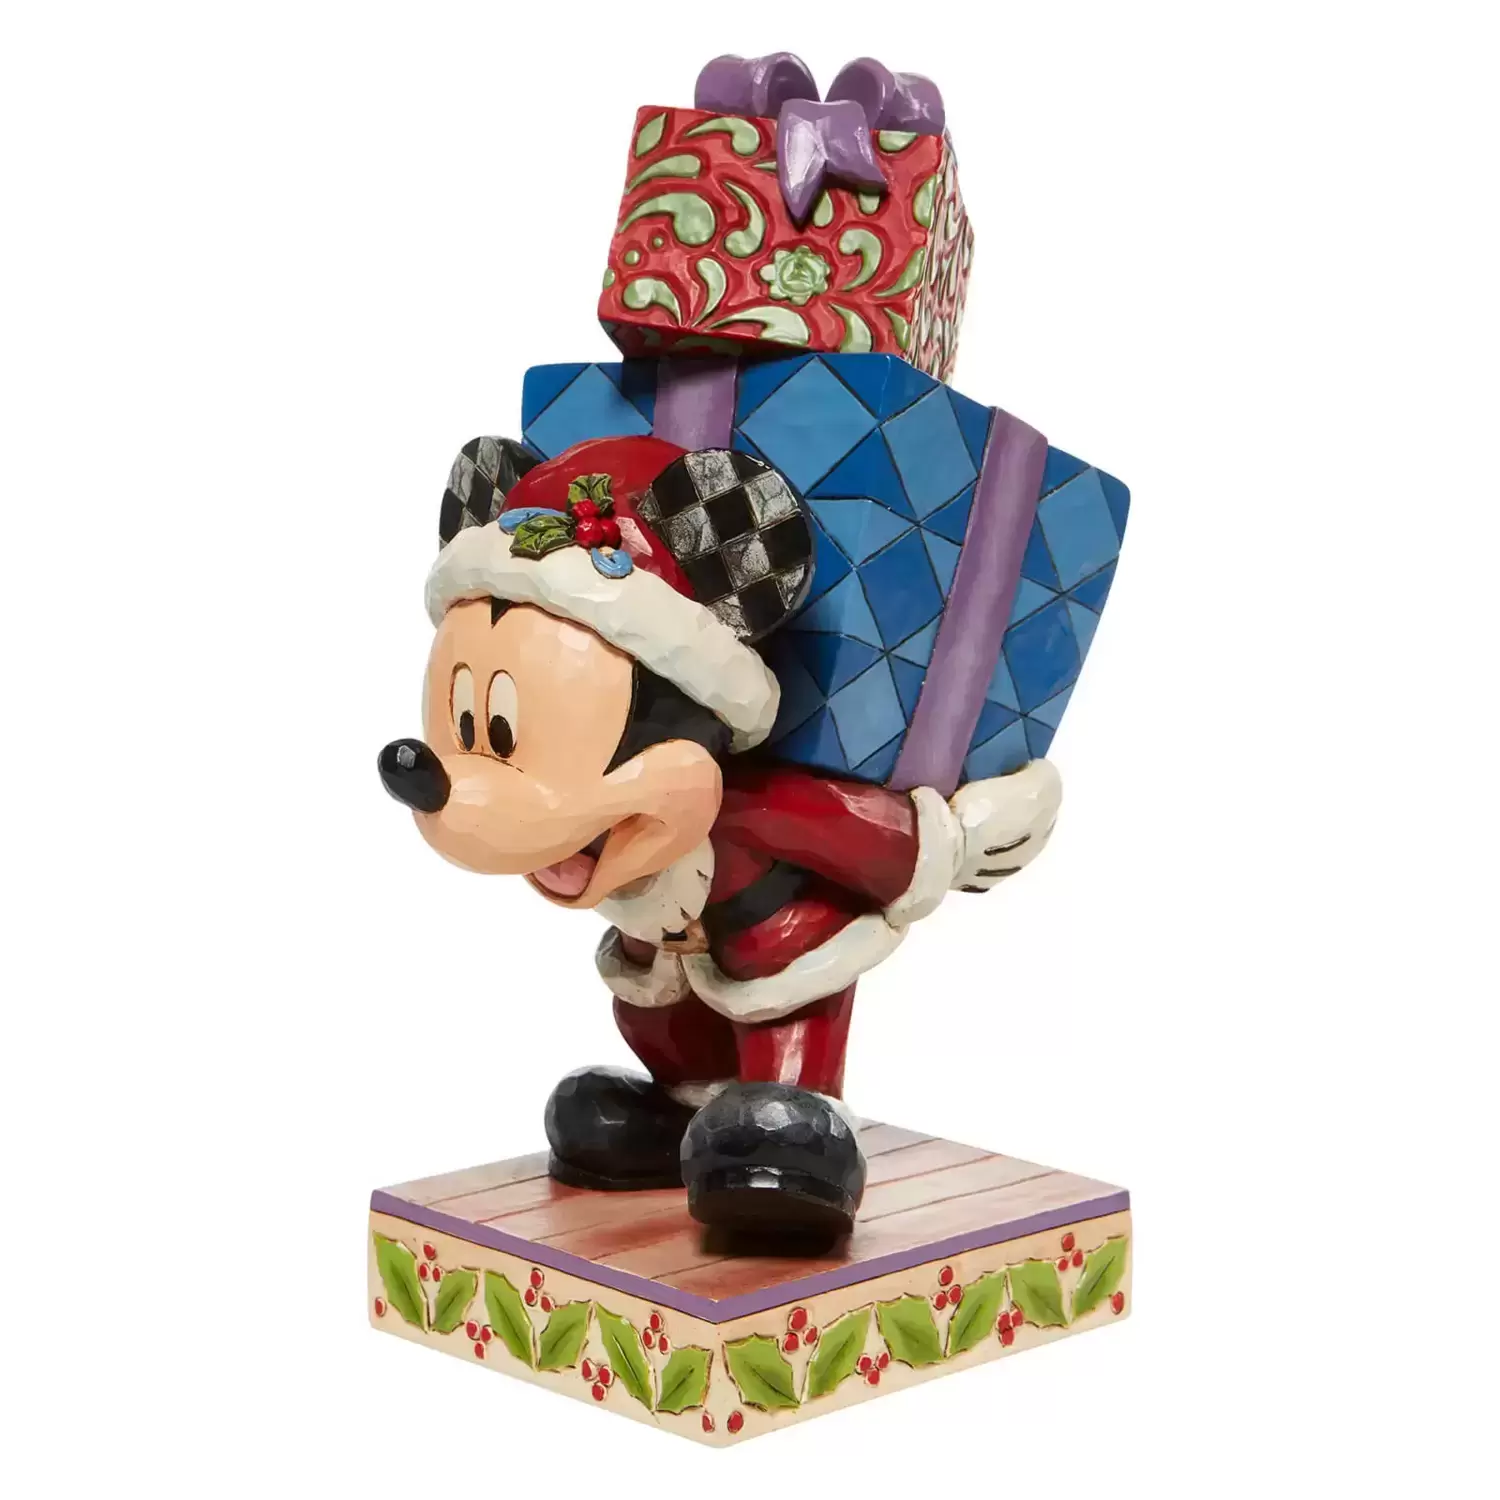 Disney Traditions by Jim Shore - Mickey with presents